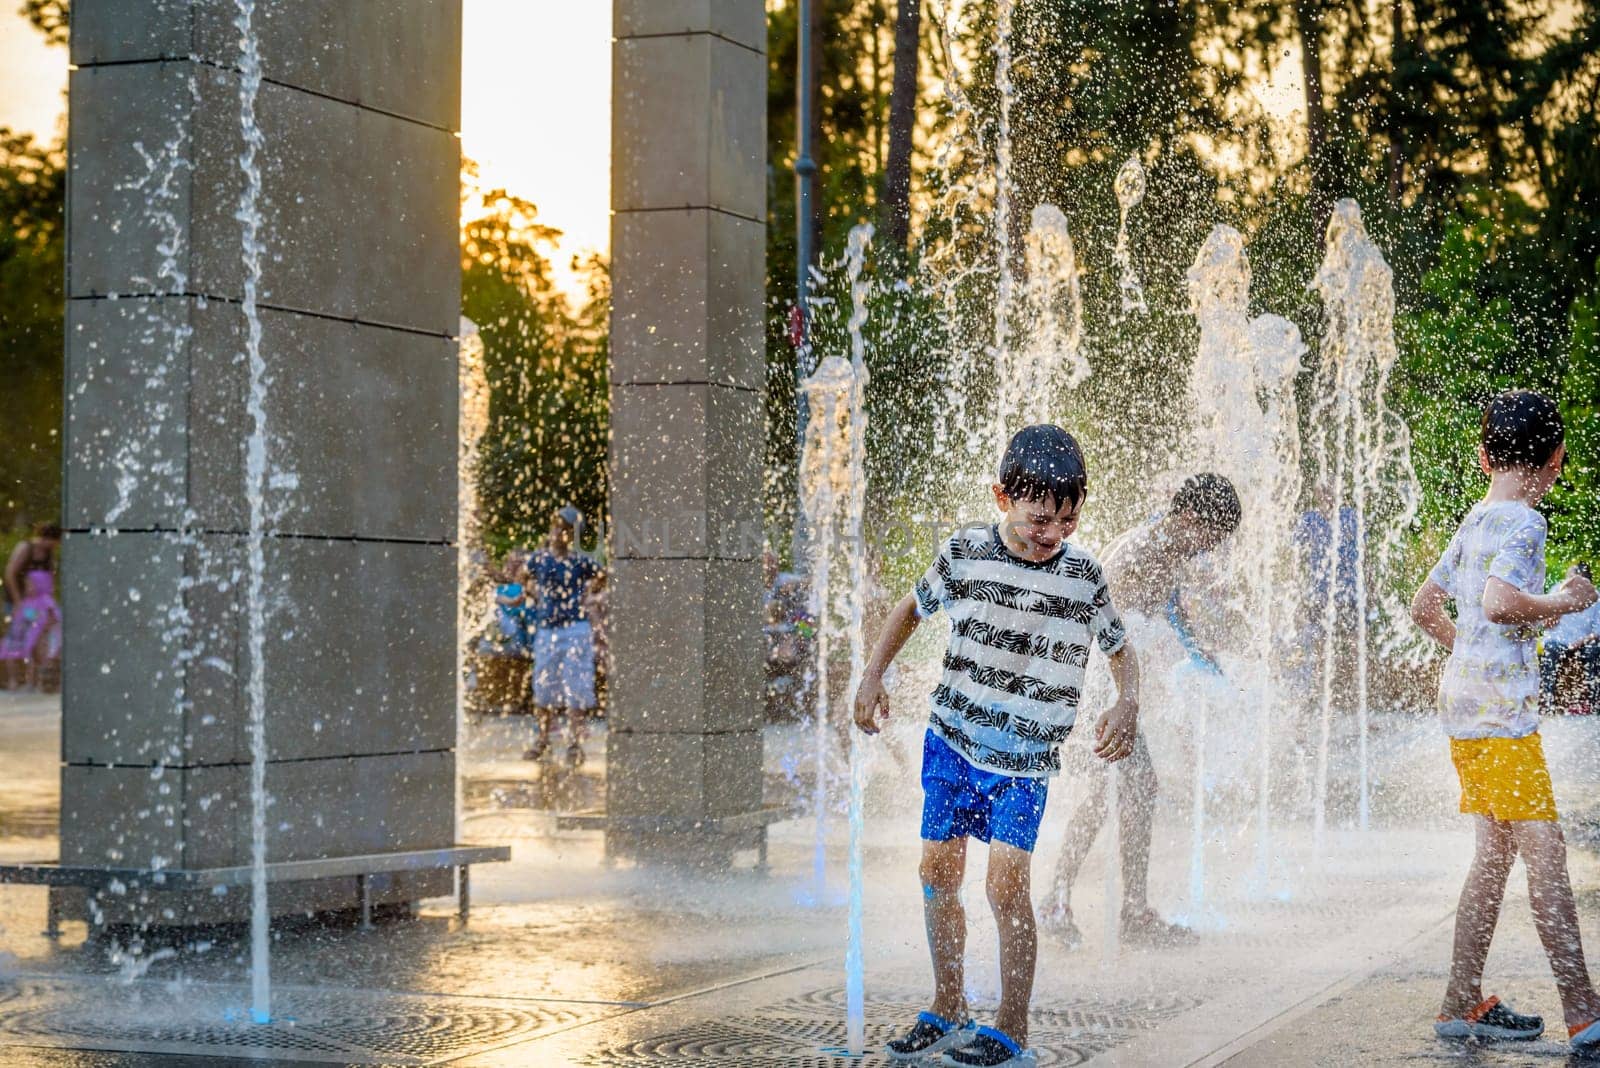 Boys jumping in water fountains. Children playing with a city fountain on hot summer day. Happy friends having fun in fountain. Summer weather. Friendship, lifestyle and vacation by Kobysh